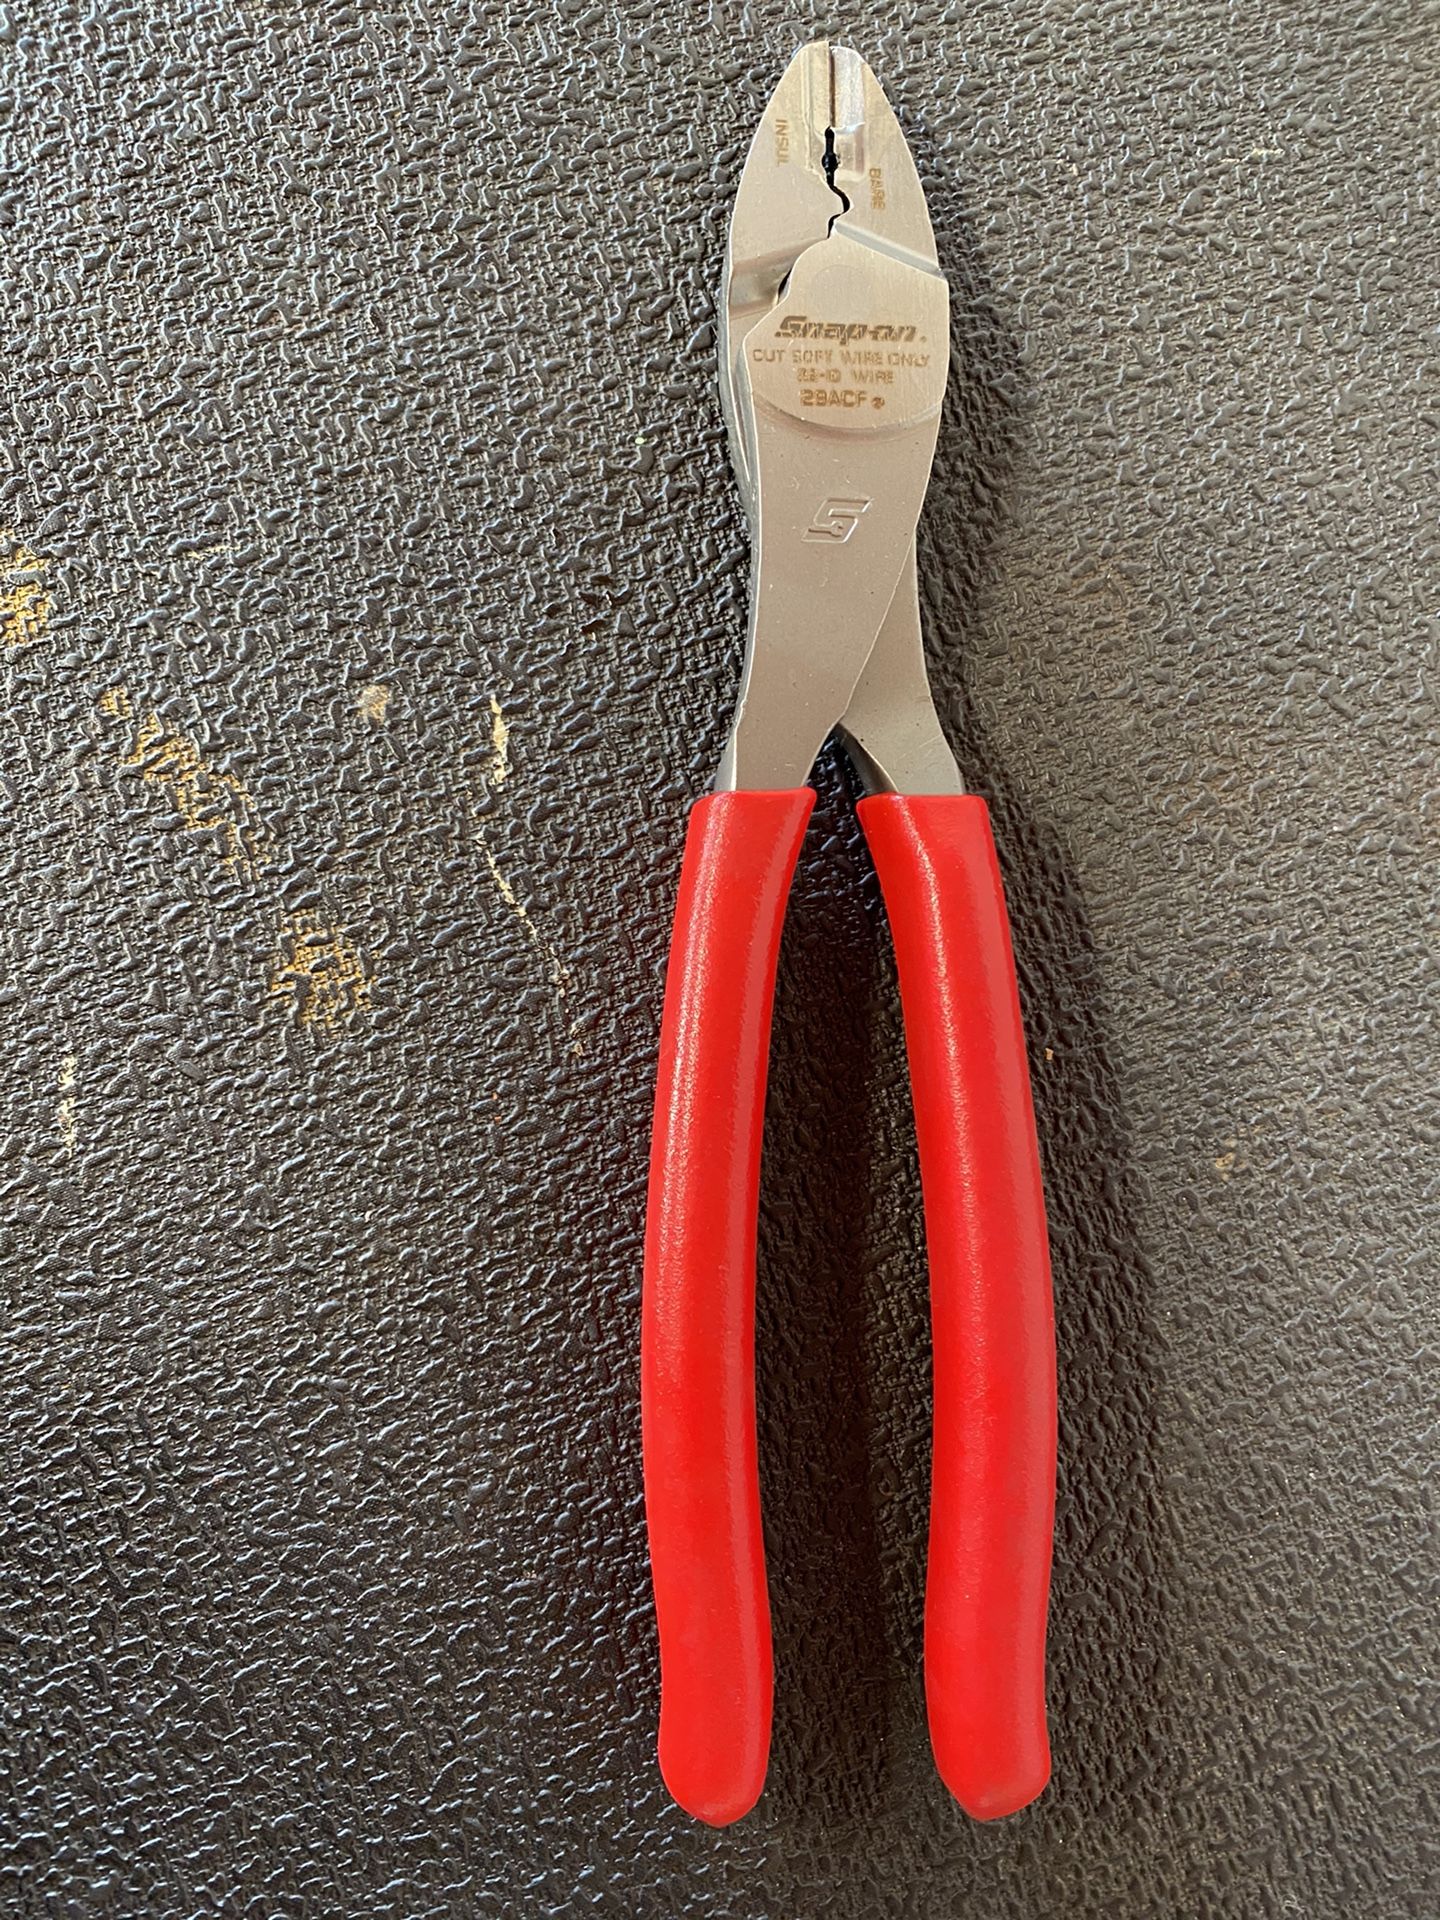 Snap-on 9" Wire Terminal Crimping Tool